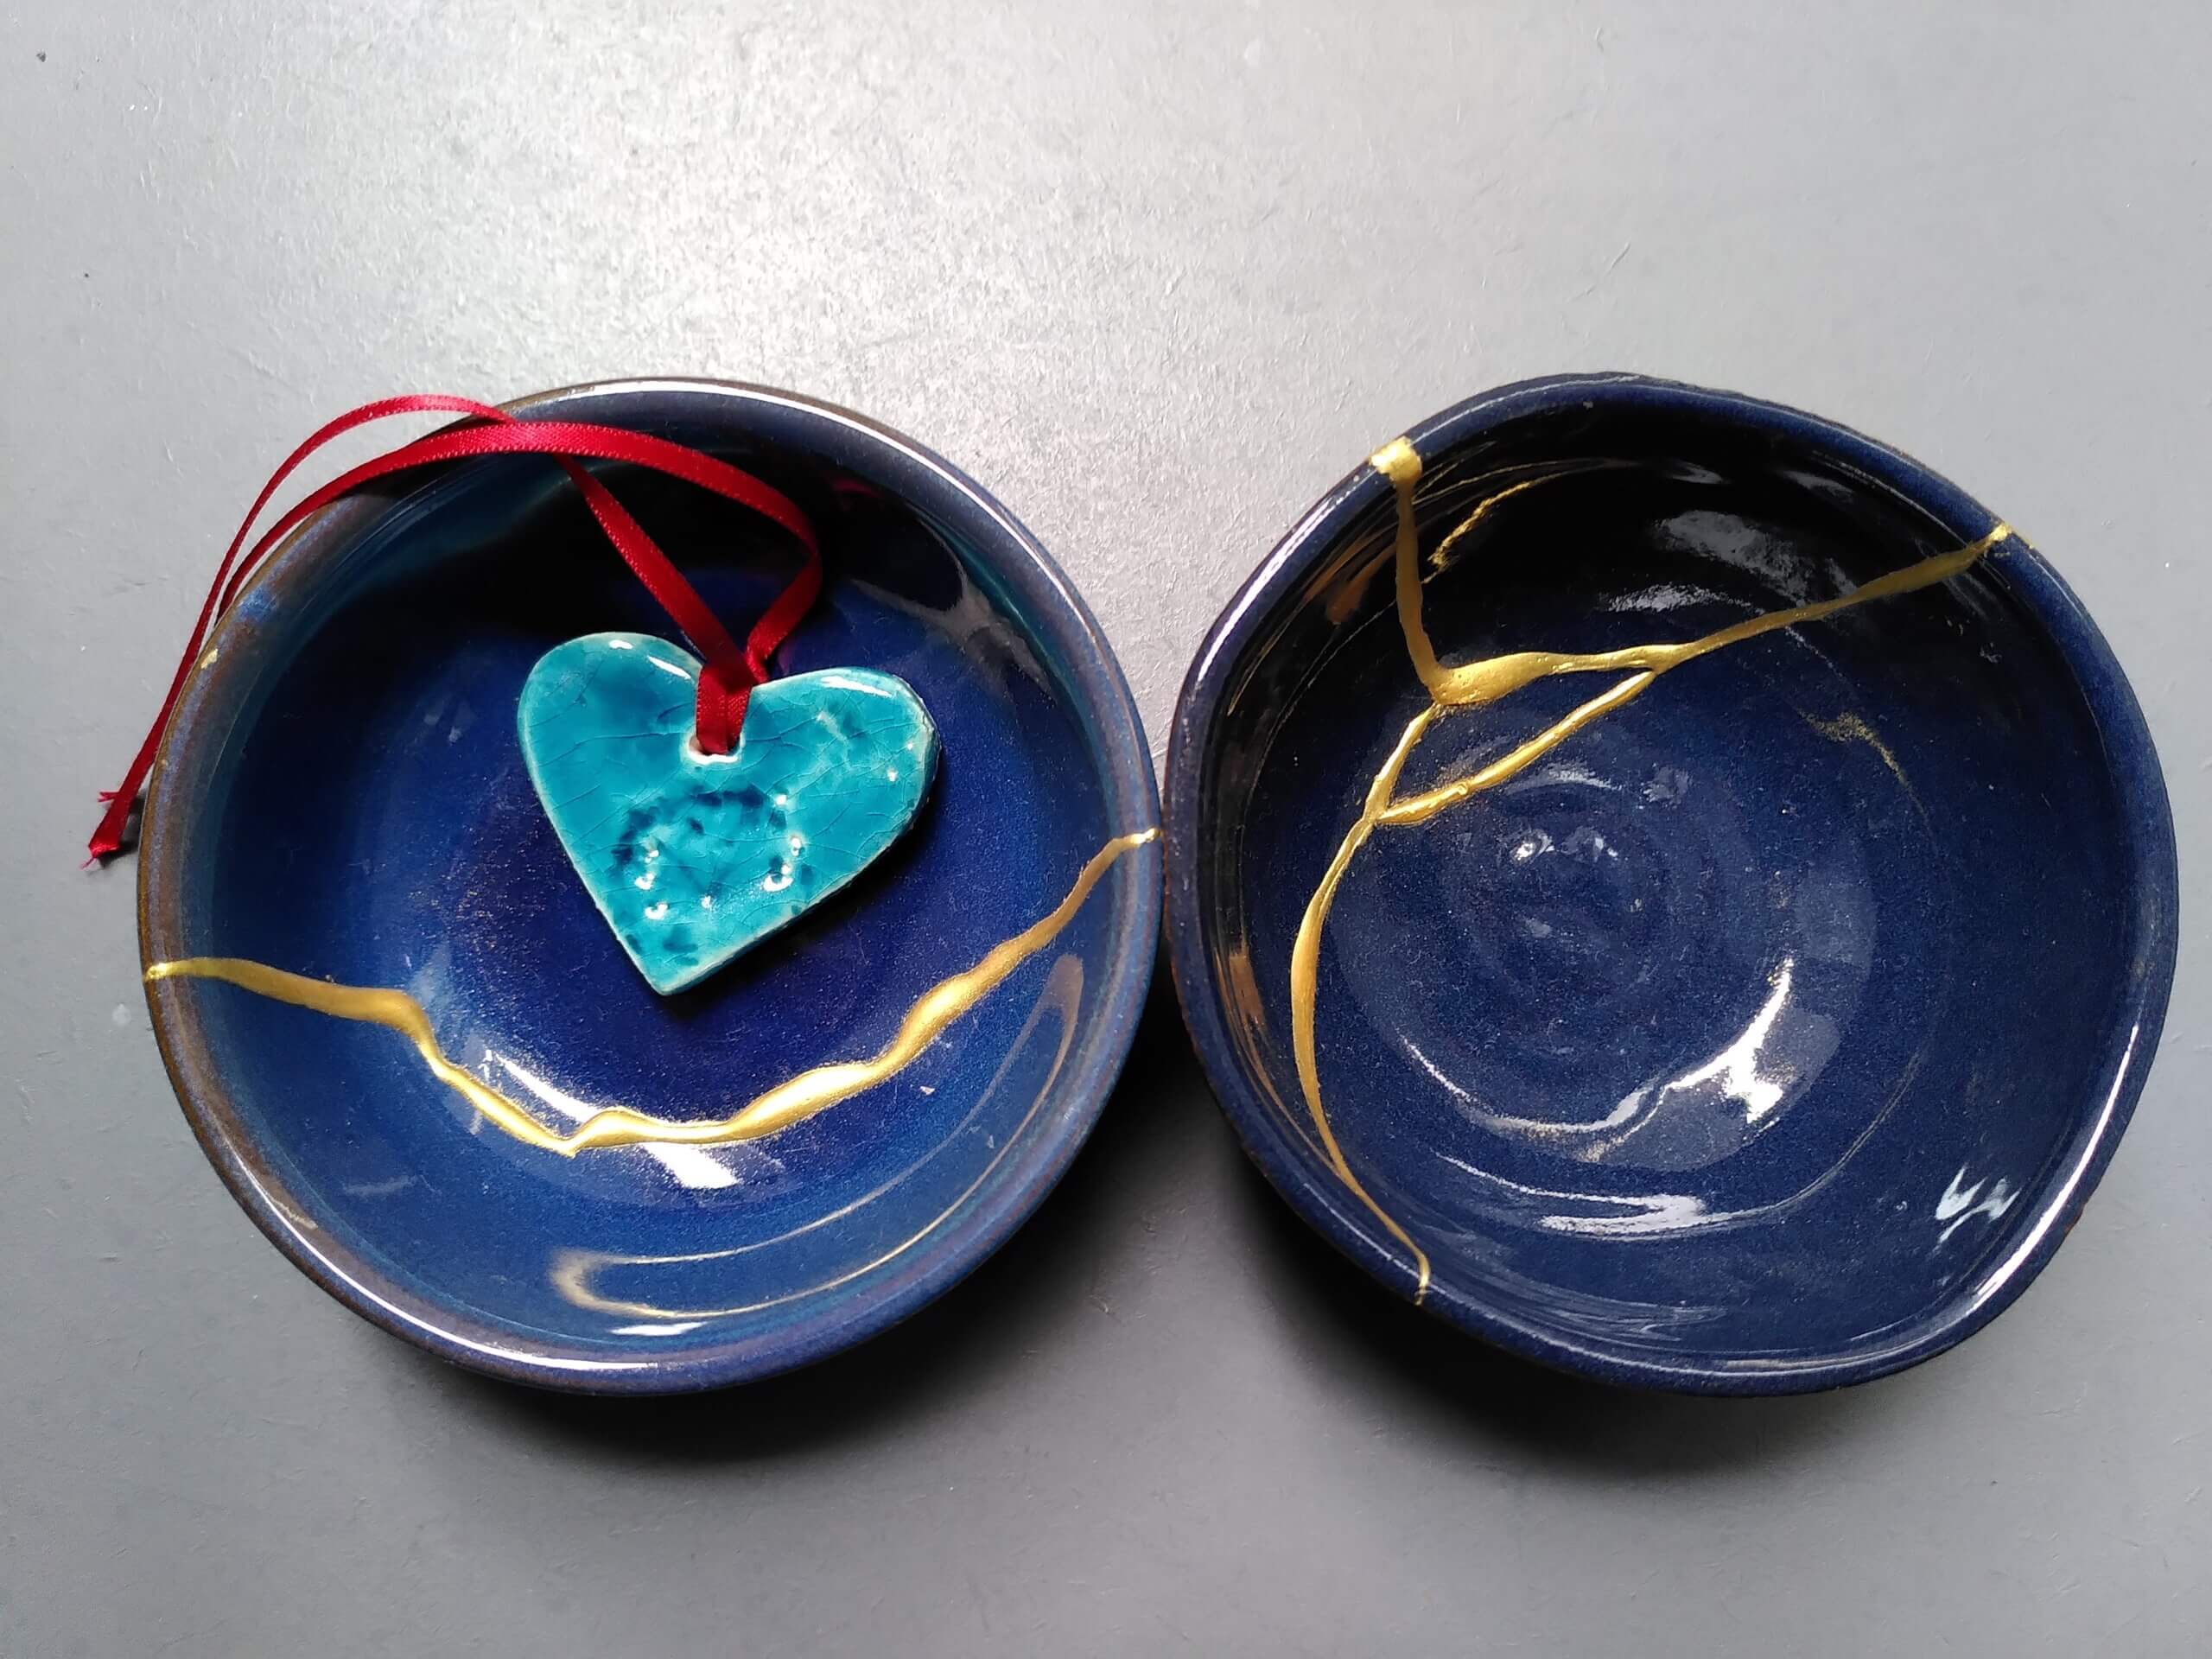 A clay heart in a blue bowl next to a similar blue bowl